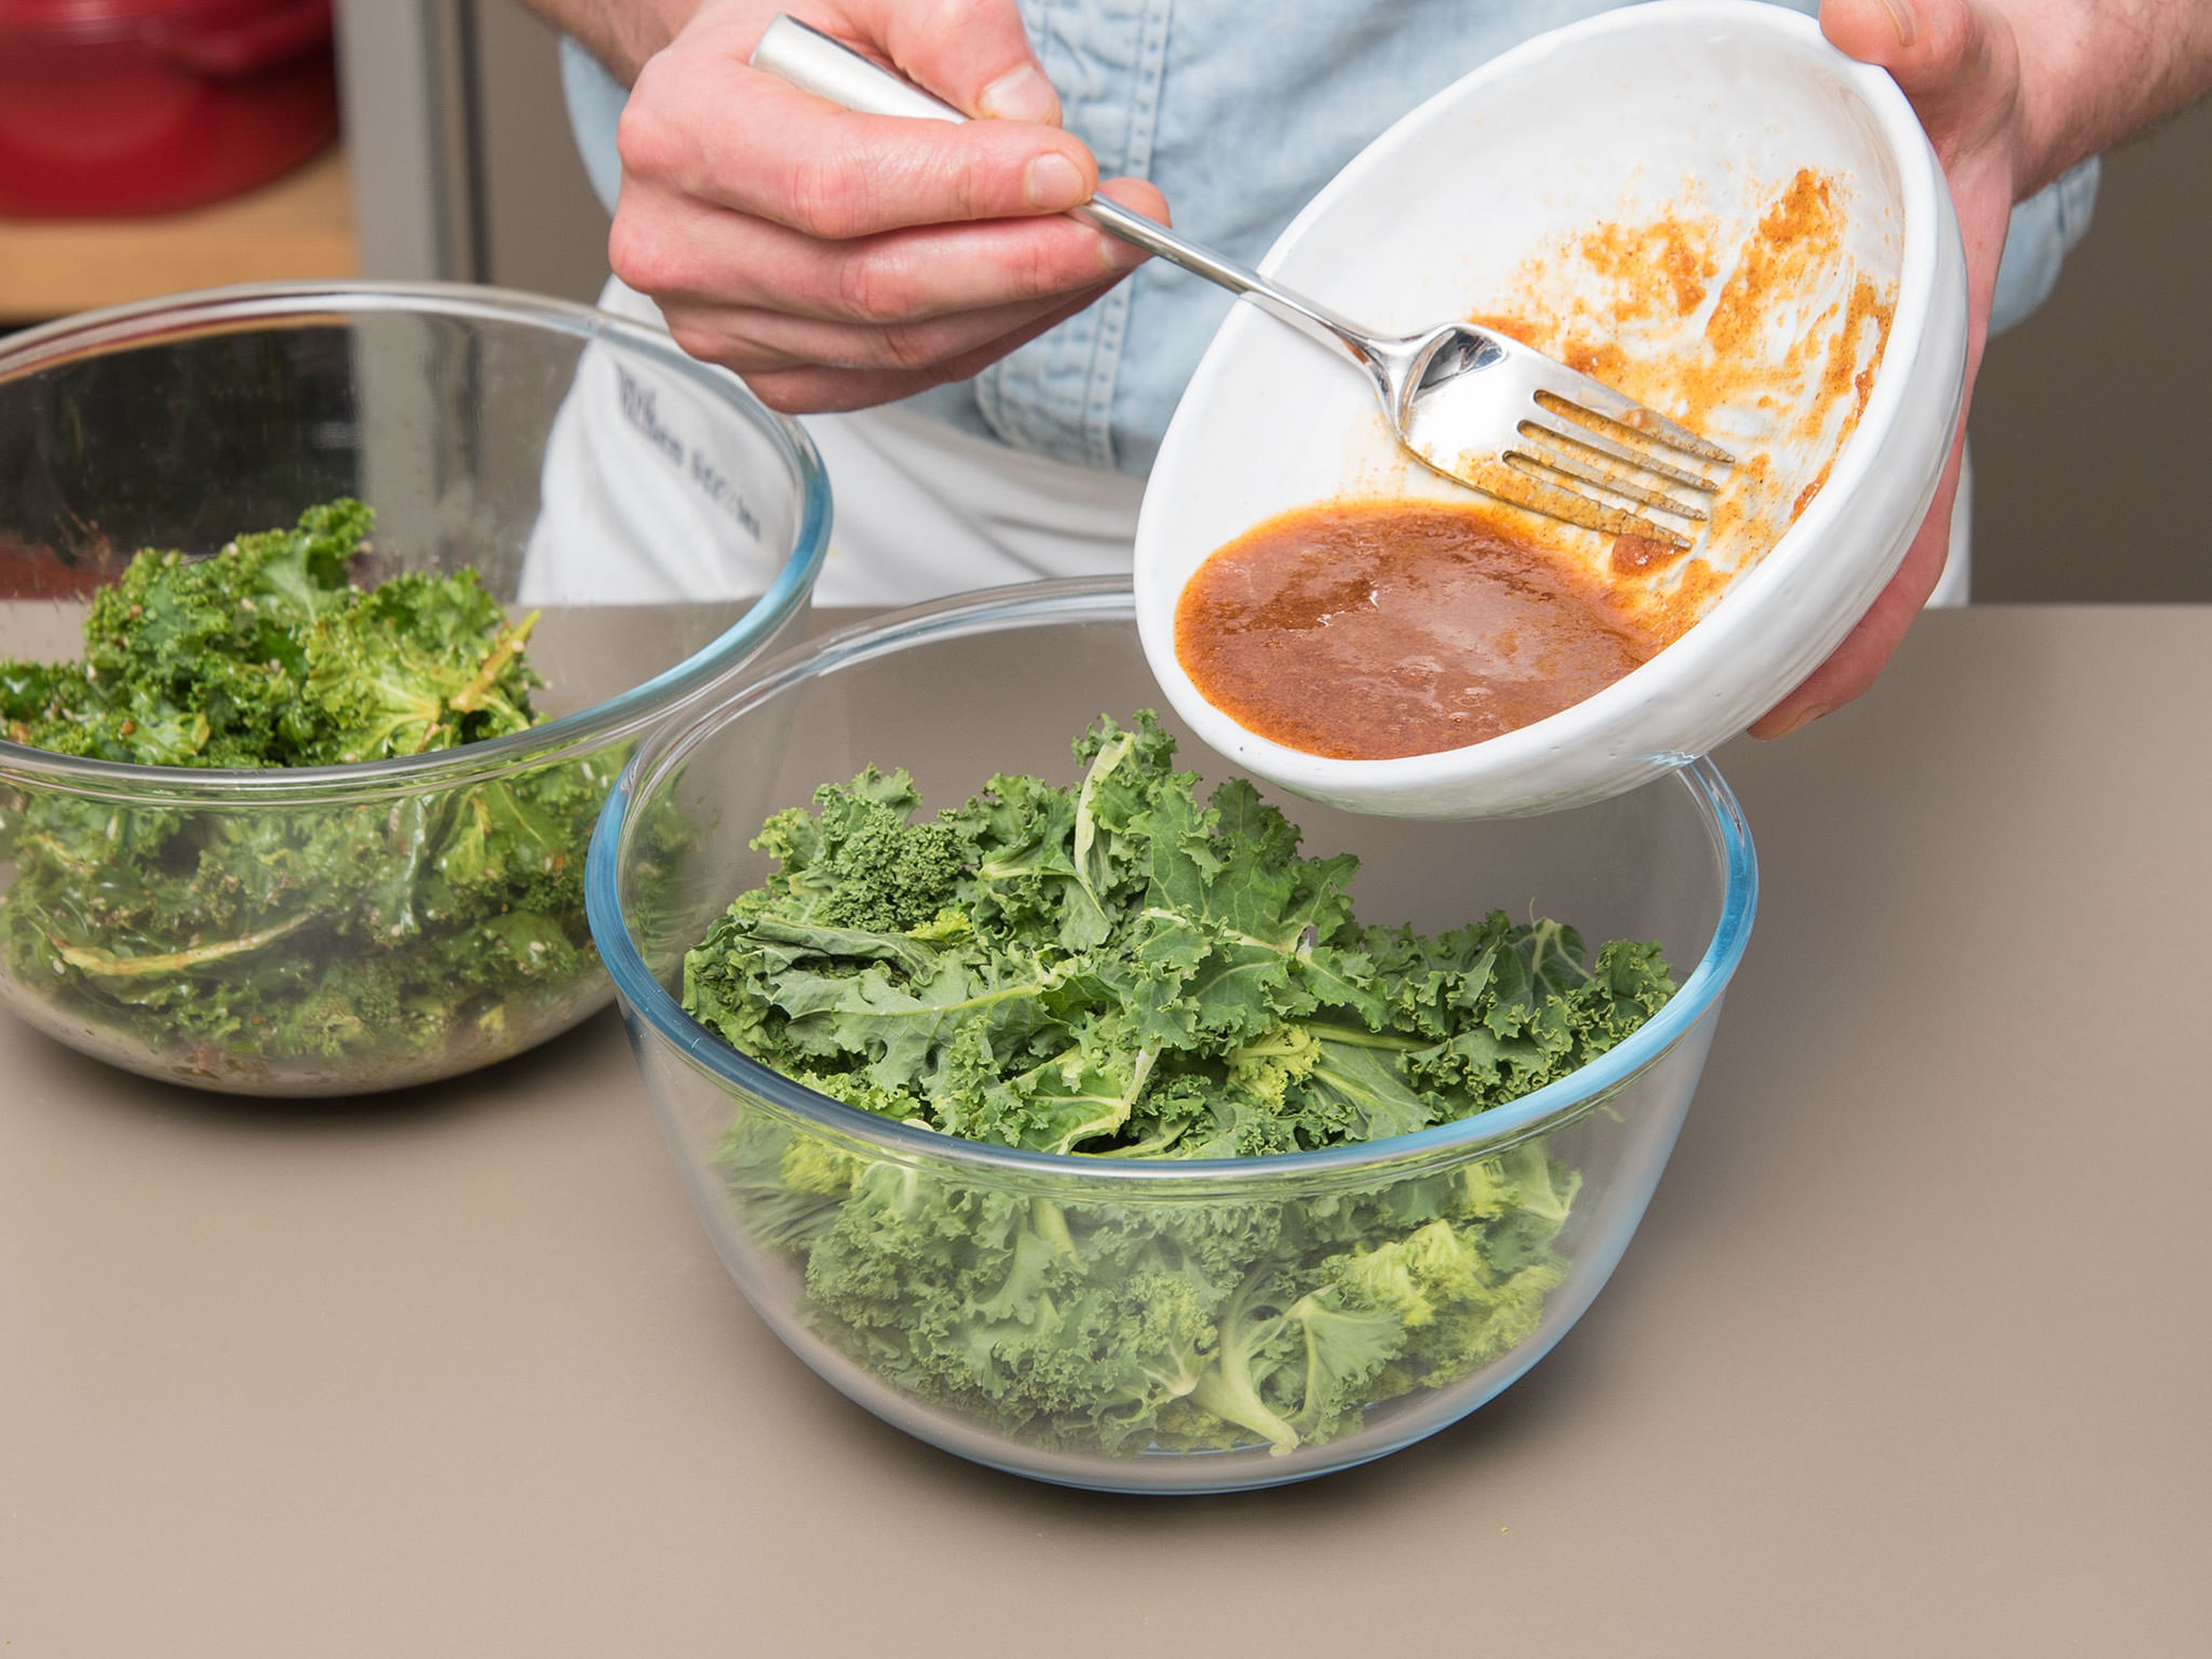 Remove kale leaves from stem, tear into bite-sized pieces, wash, and dry completely. Divide kale into two bowls, add one bowl of marinade to each, tossing until kale is fully and evenly coated.